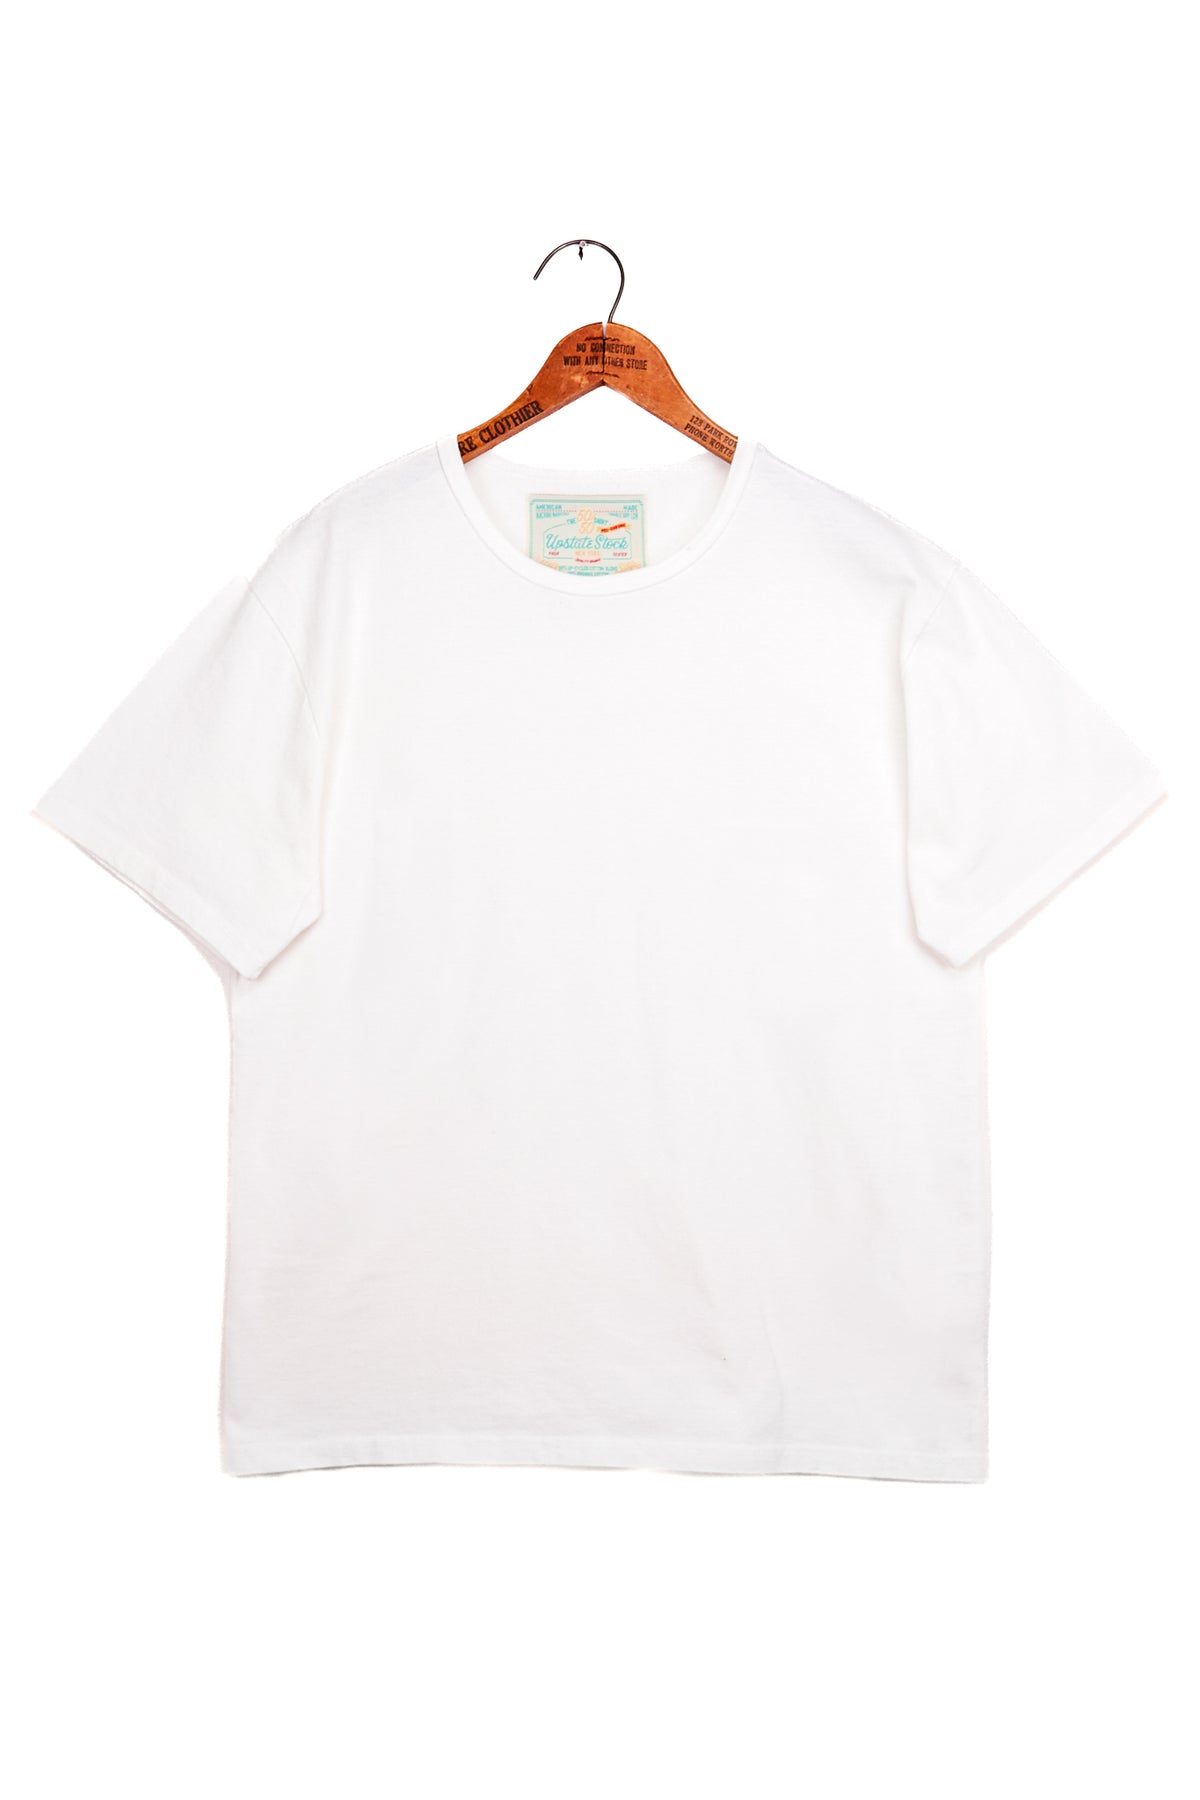 The 50/50 Shirt - CLASSIC TEE - Bleached White